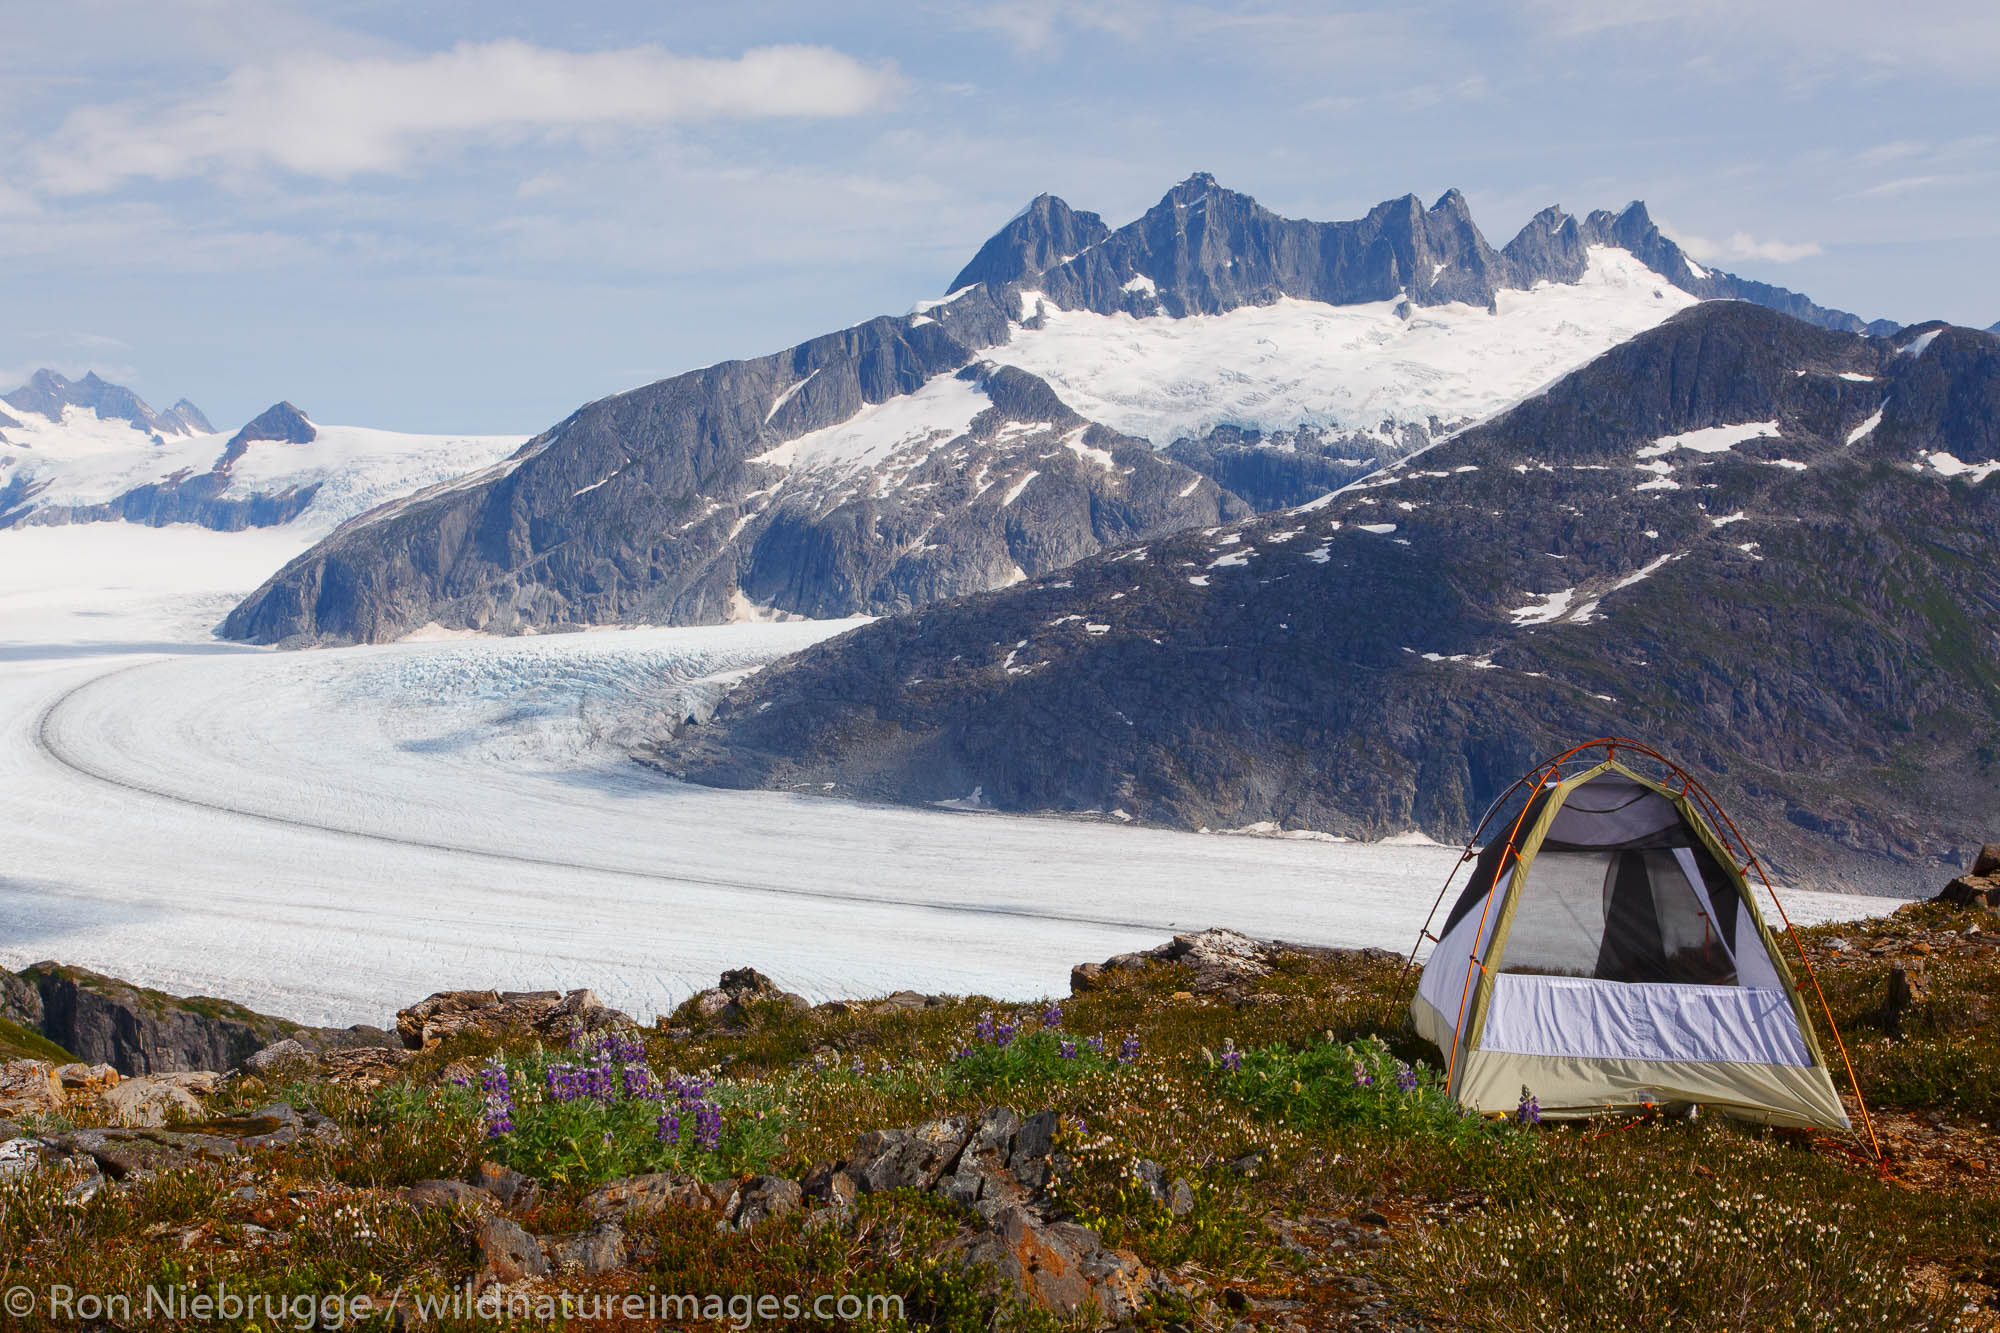 Camping on Mount Stroller White above the Mendenhall Glacier, Tongass National Forest, Alaska.